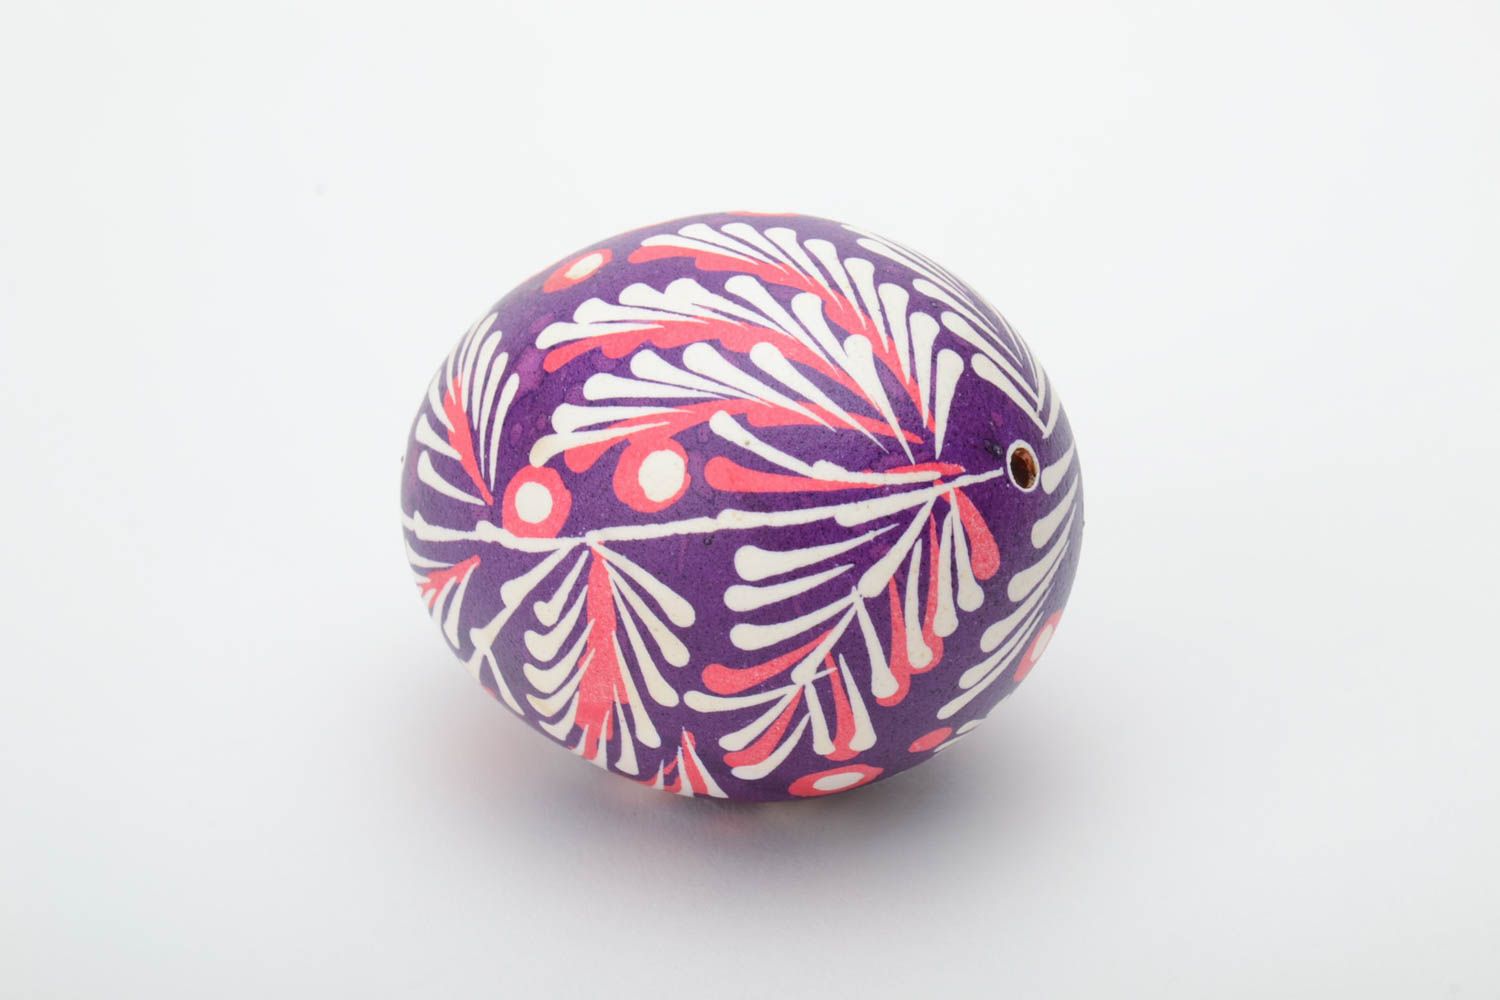 Handmade bright lilac painted Easter egg with white ornaments in Lemkiv style photo 4